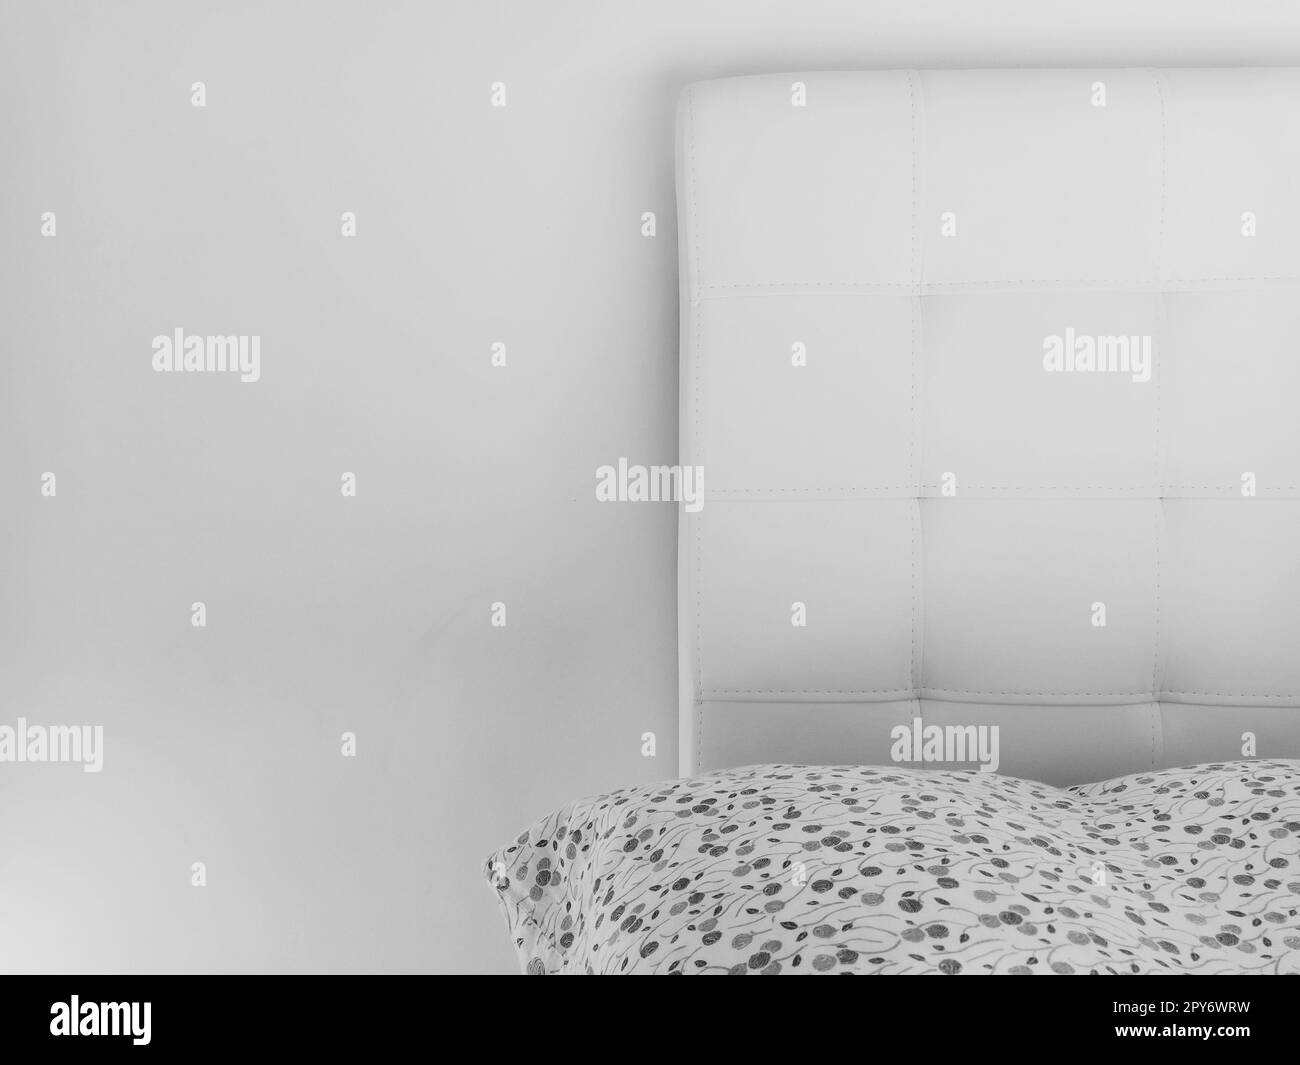 Soft headboard. Upholstery for furniture made of genuine or artificial leather and quilted fabric. Soft headboard against a light wall. Black and white monochrome photo Stock Photo